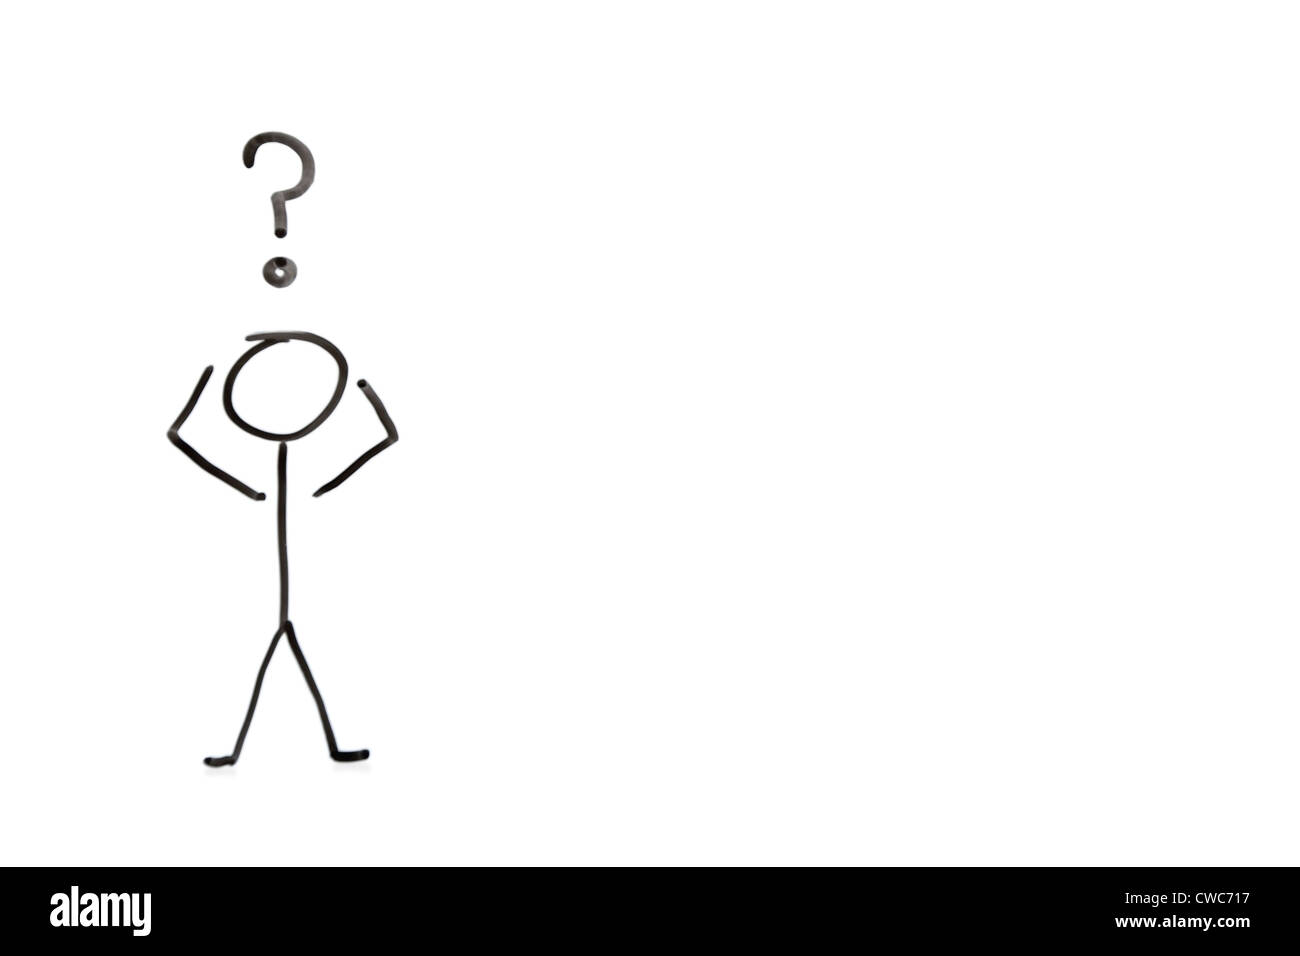 Stick figure with question mark depicting confusion over white background Stock Photo